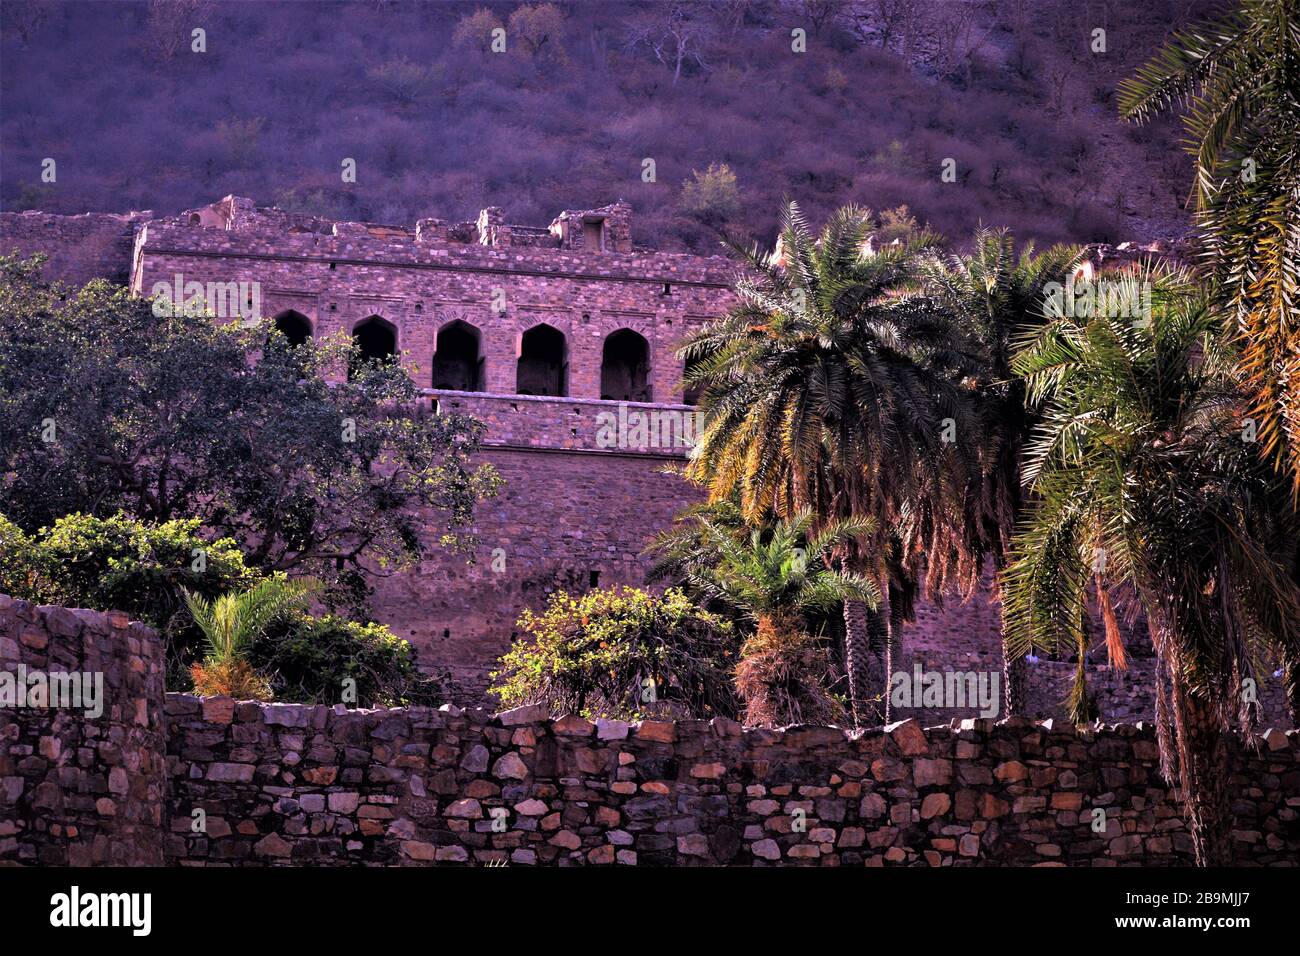 Awesome pinkish  view of ruined nahargarh fort with mighty hills in backdrop located in Jaipur, Rajasthan, India Stock Photo